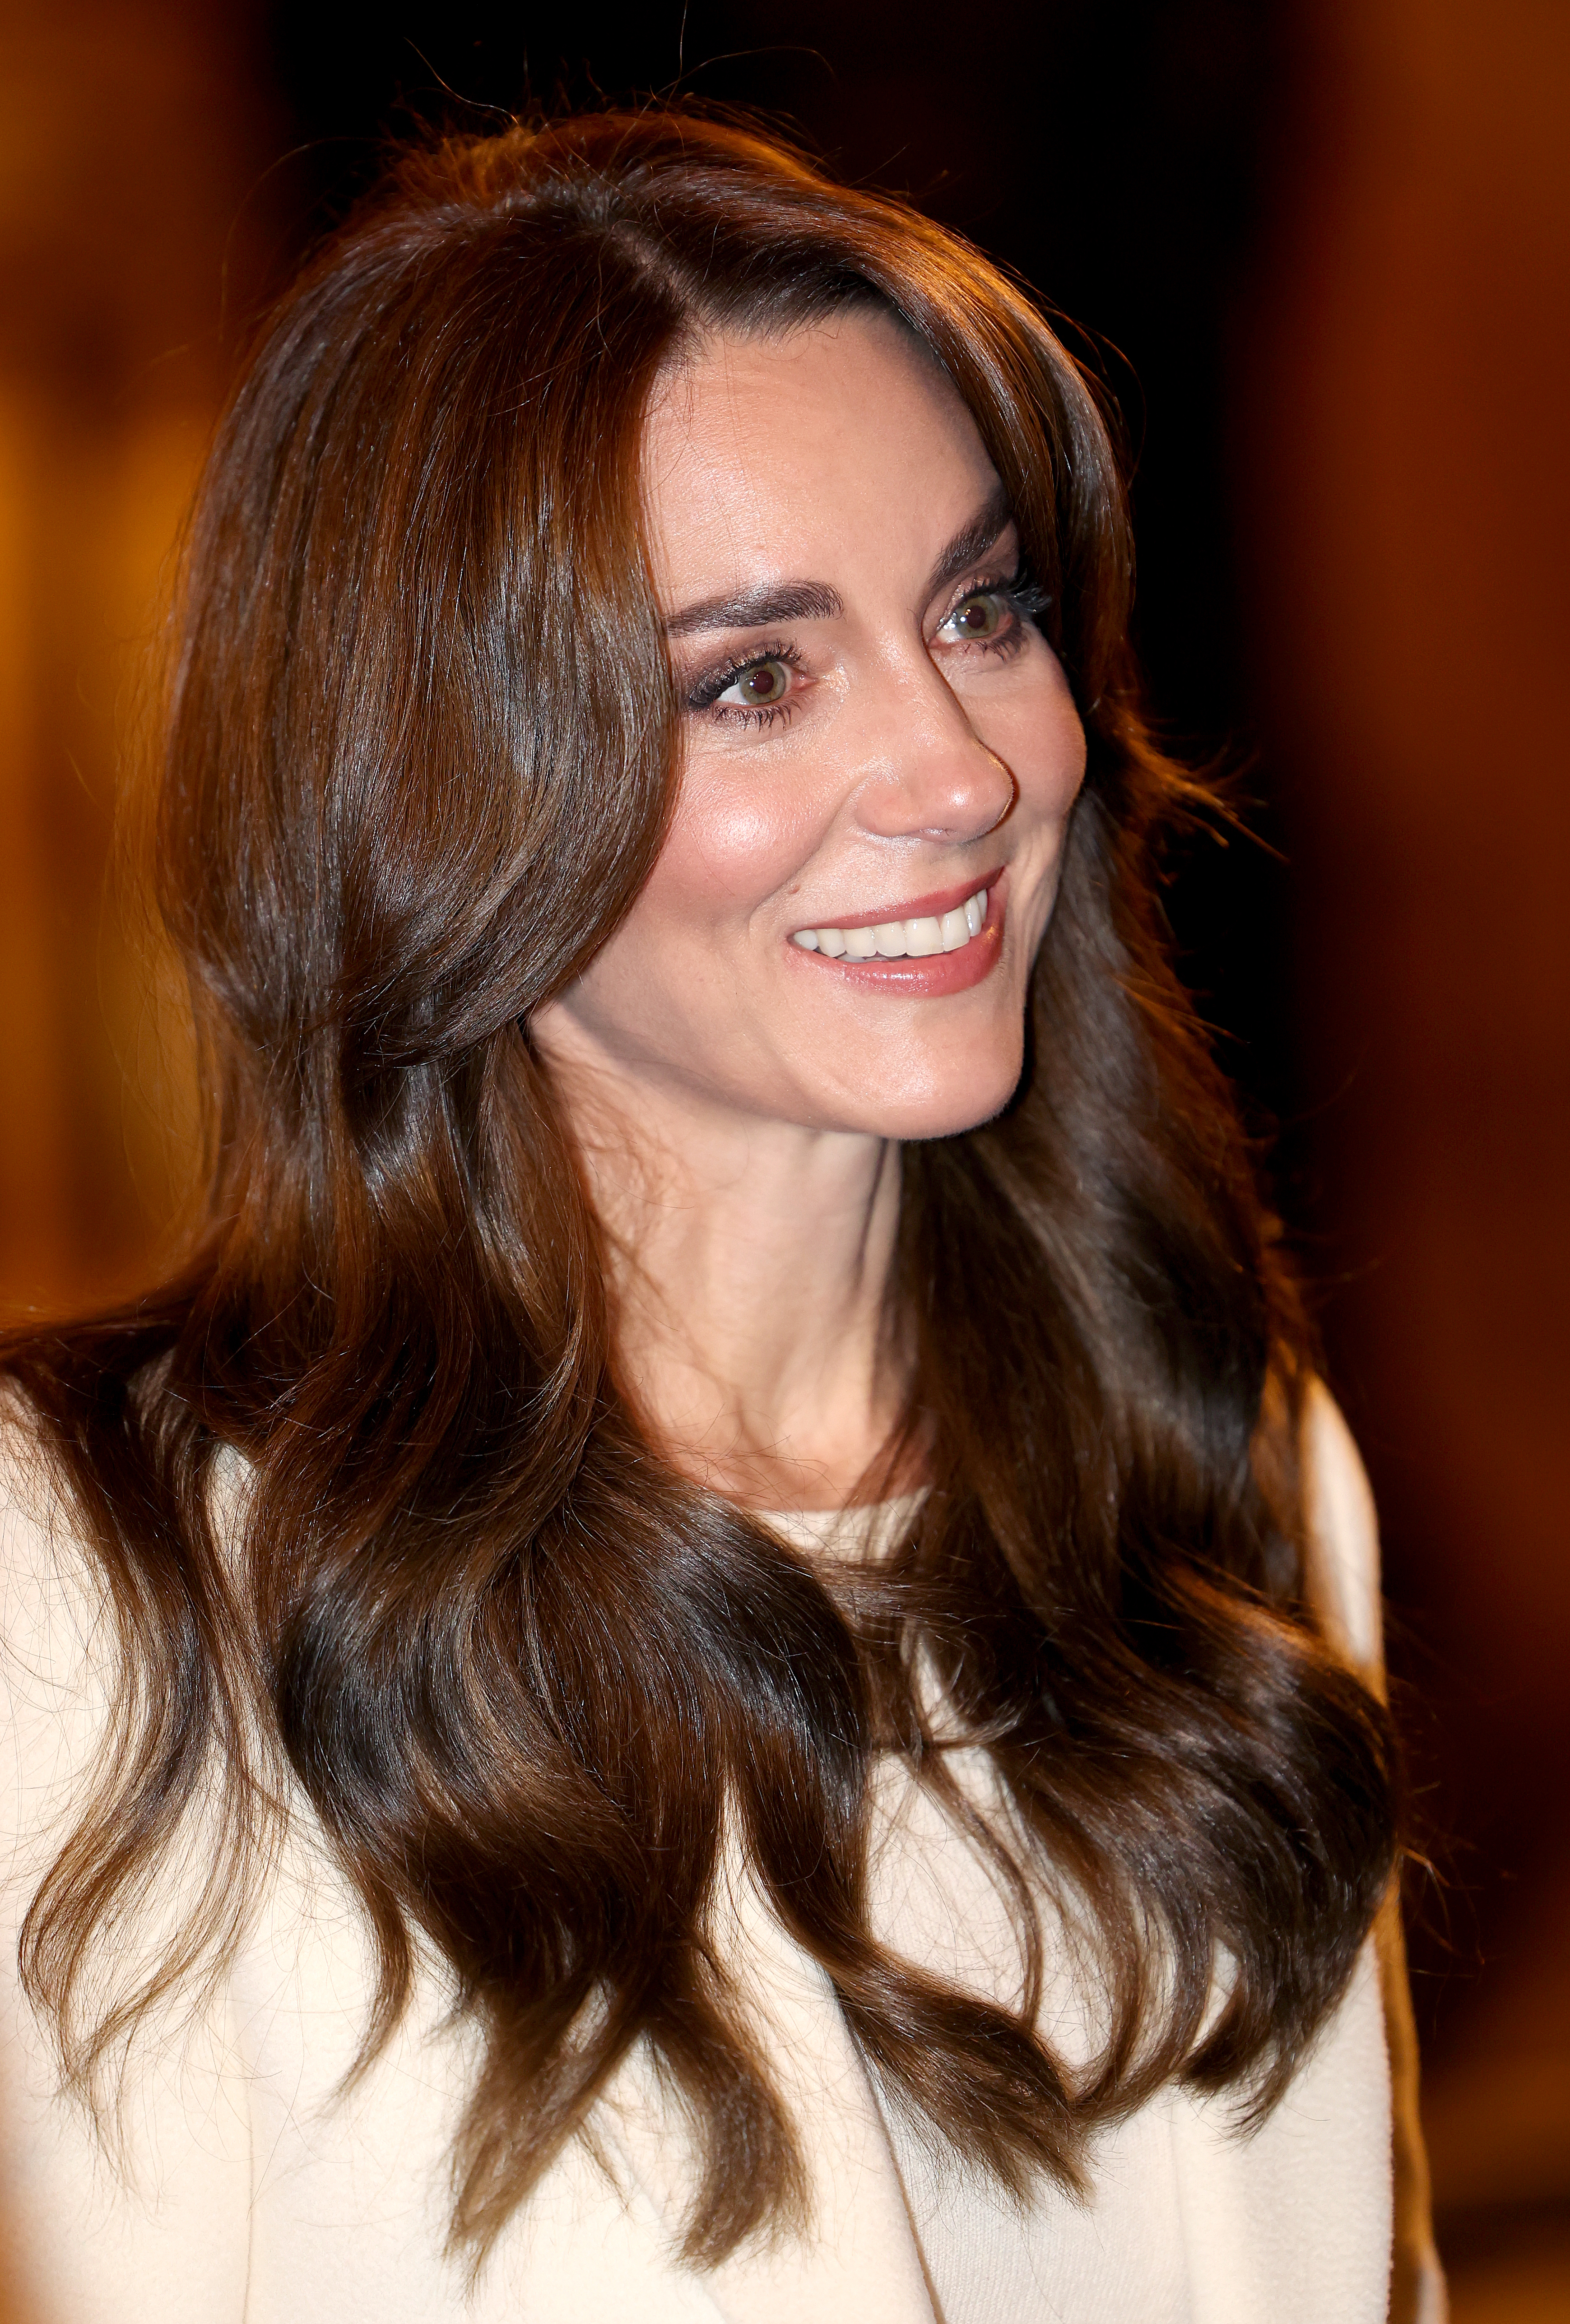 Close-up of a smiling Kate, wearing a light-colored top